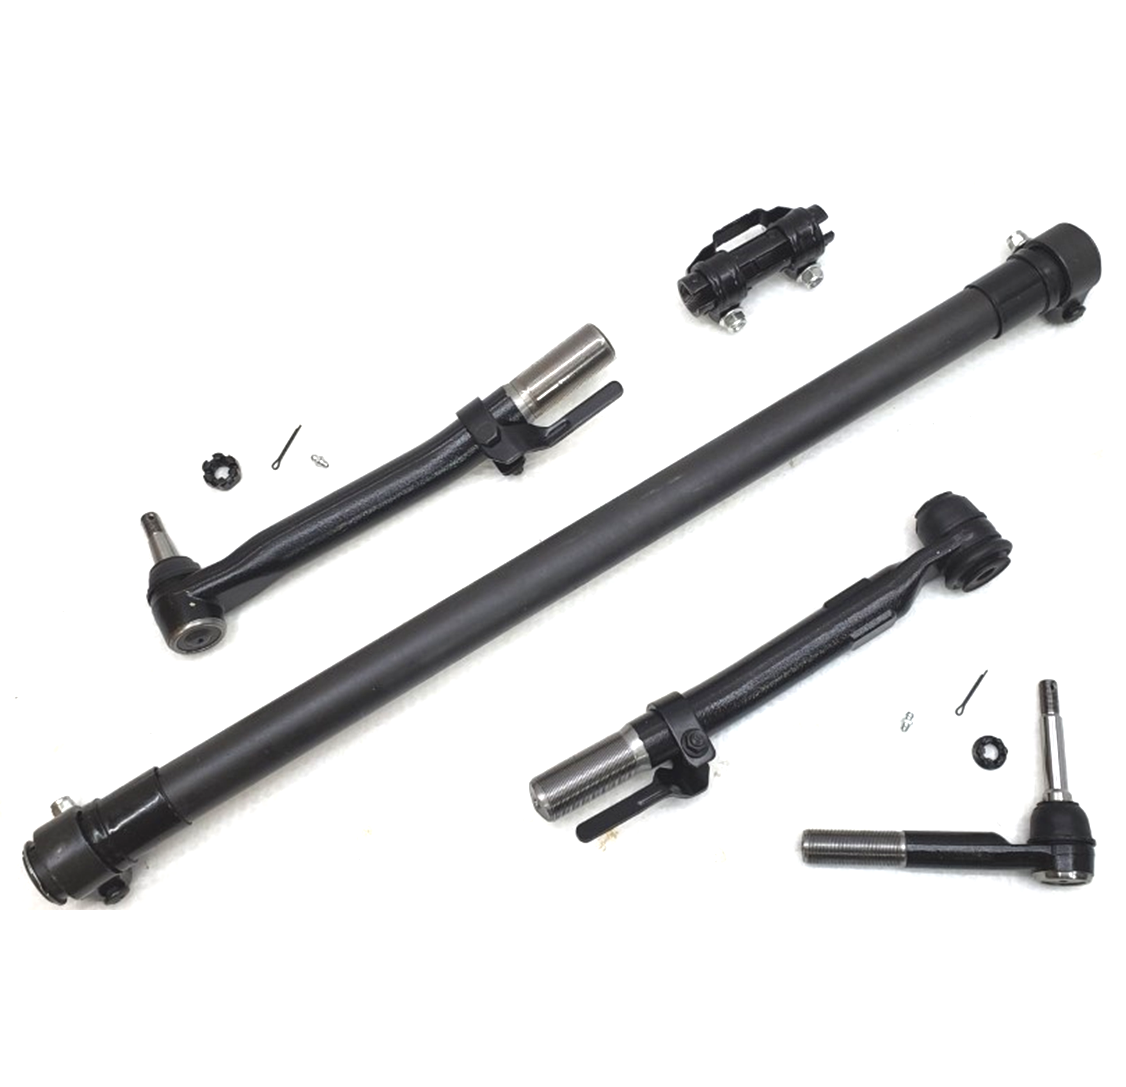 Heavy Duty Select Tie Rod Sleeve Kit for 2017-2019 Ford F250, F350 Super Duty 4x4 Wide Frame